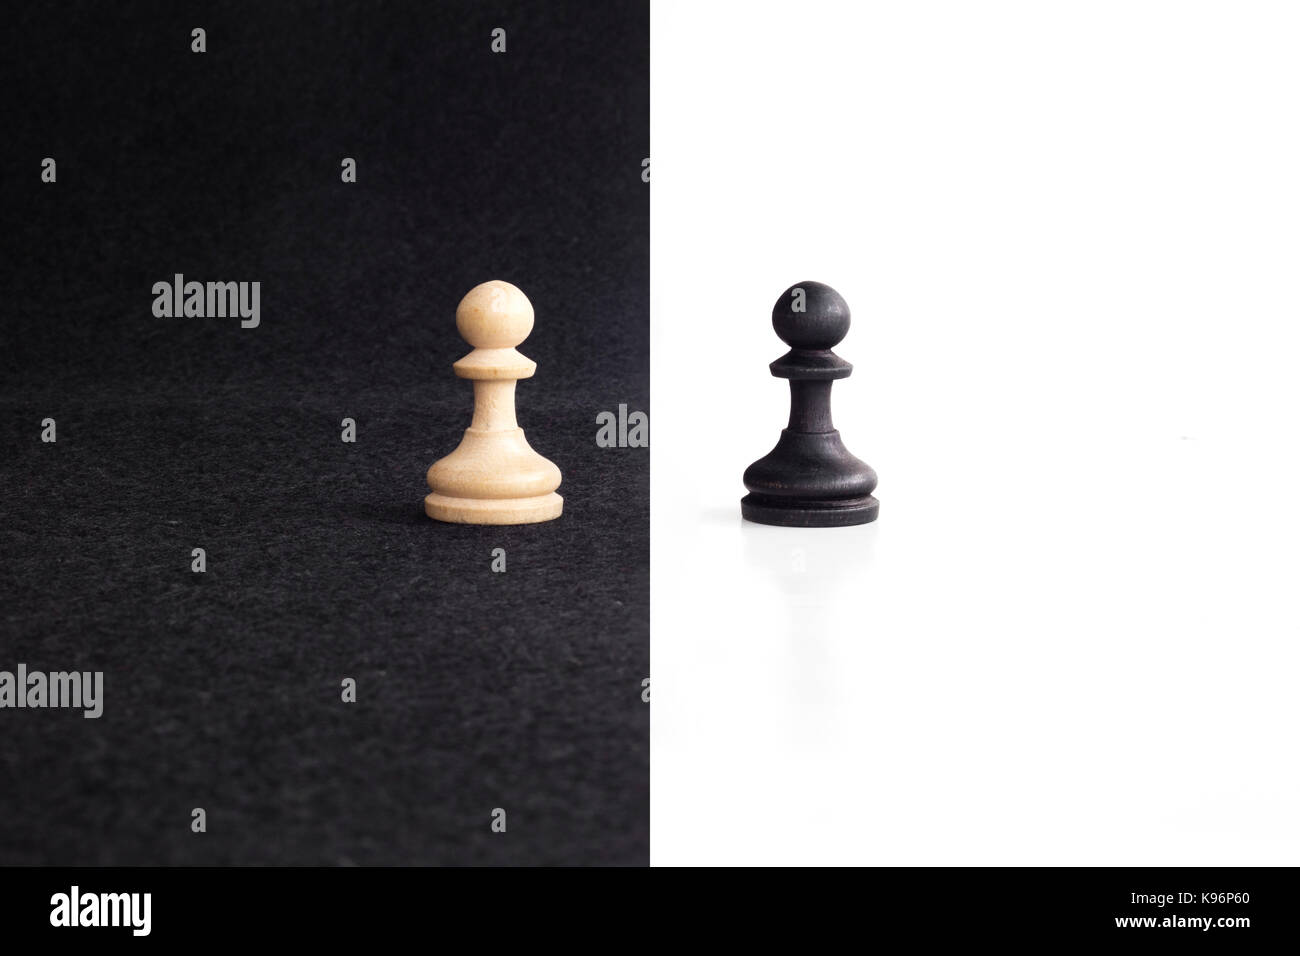 Pair of peon chess peaces confronted as opposites in black and white background. Stock Photo